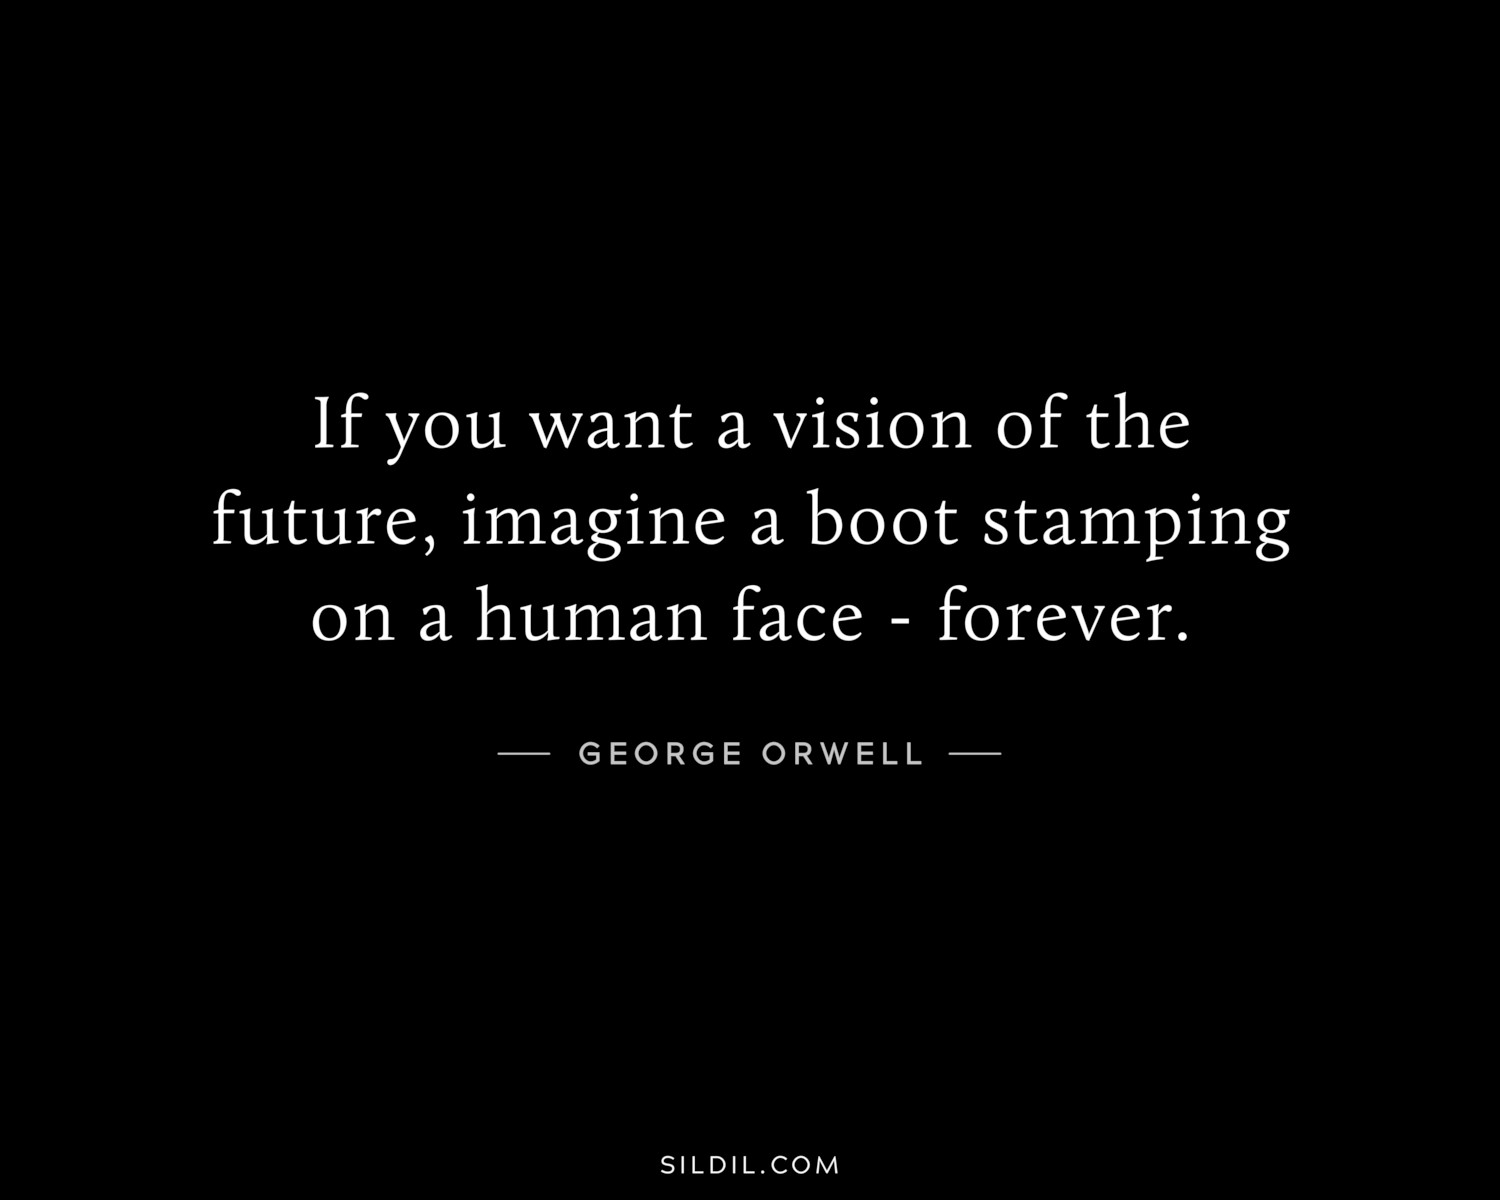 If you want a vision of the future, imagine a boot stamping on a human face - forever.